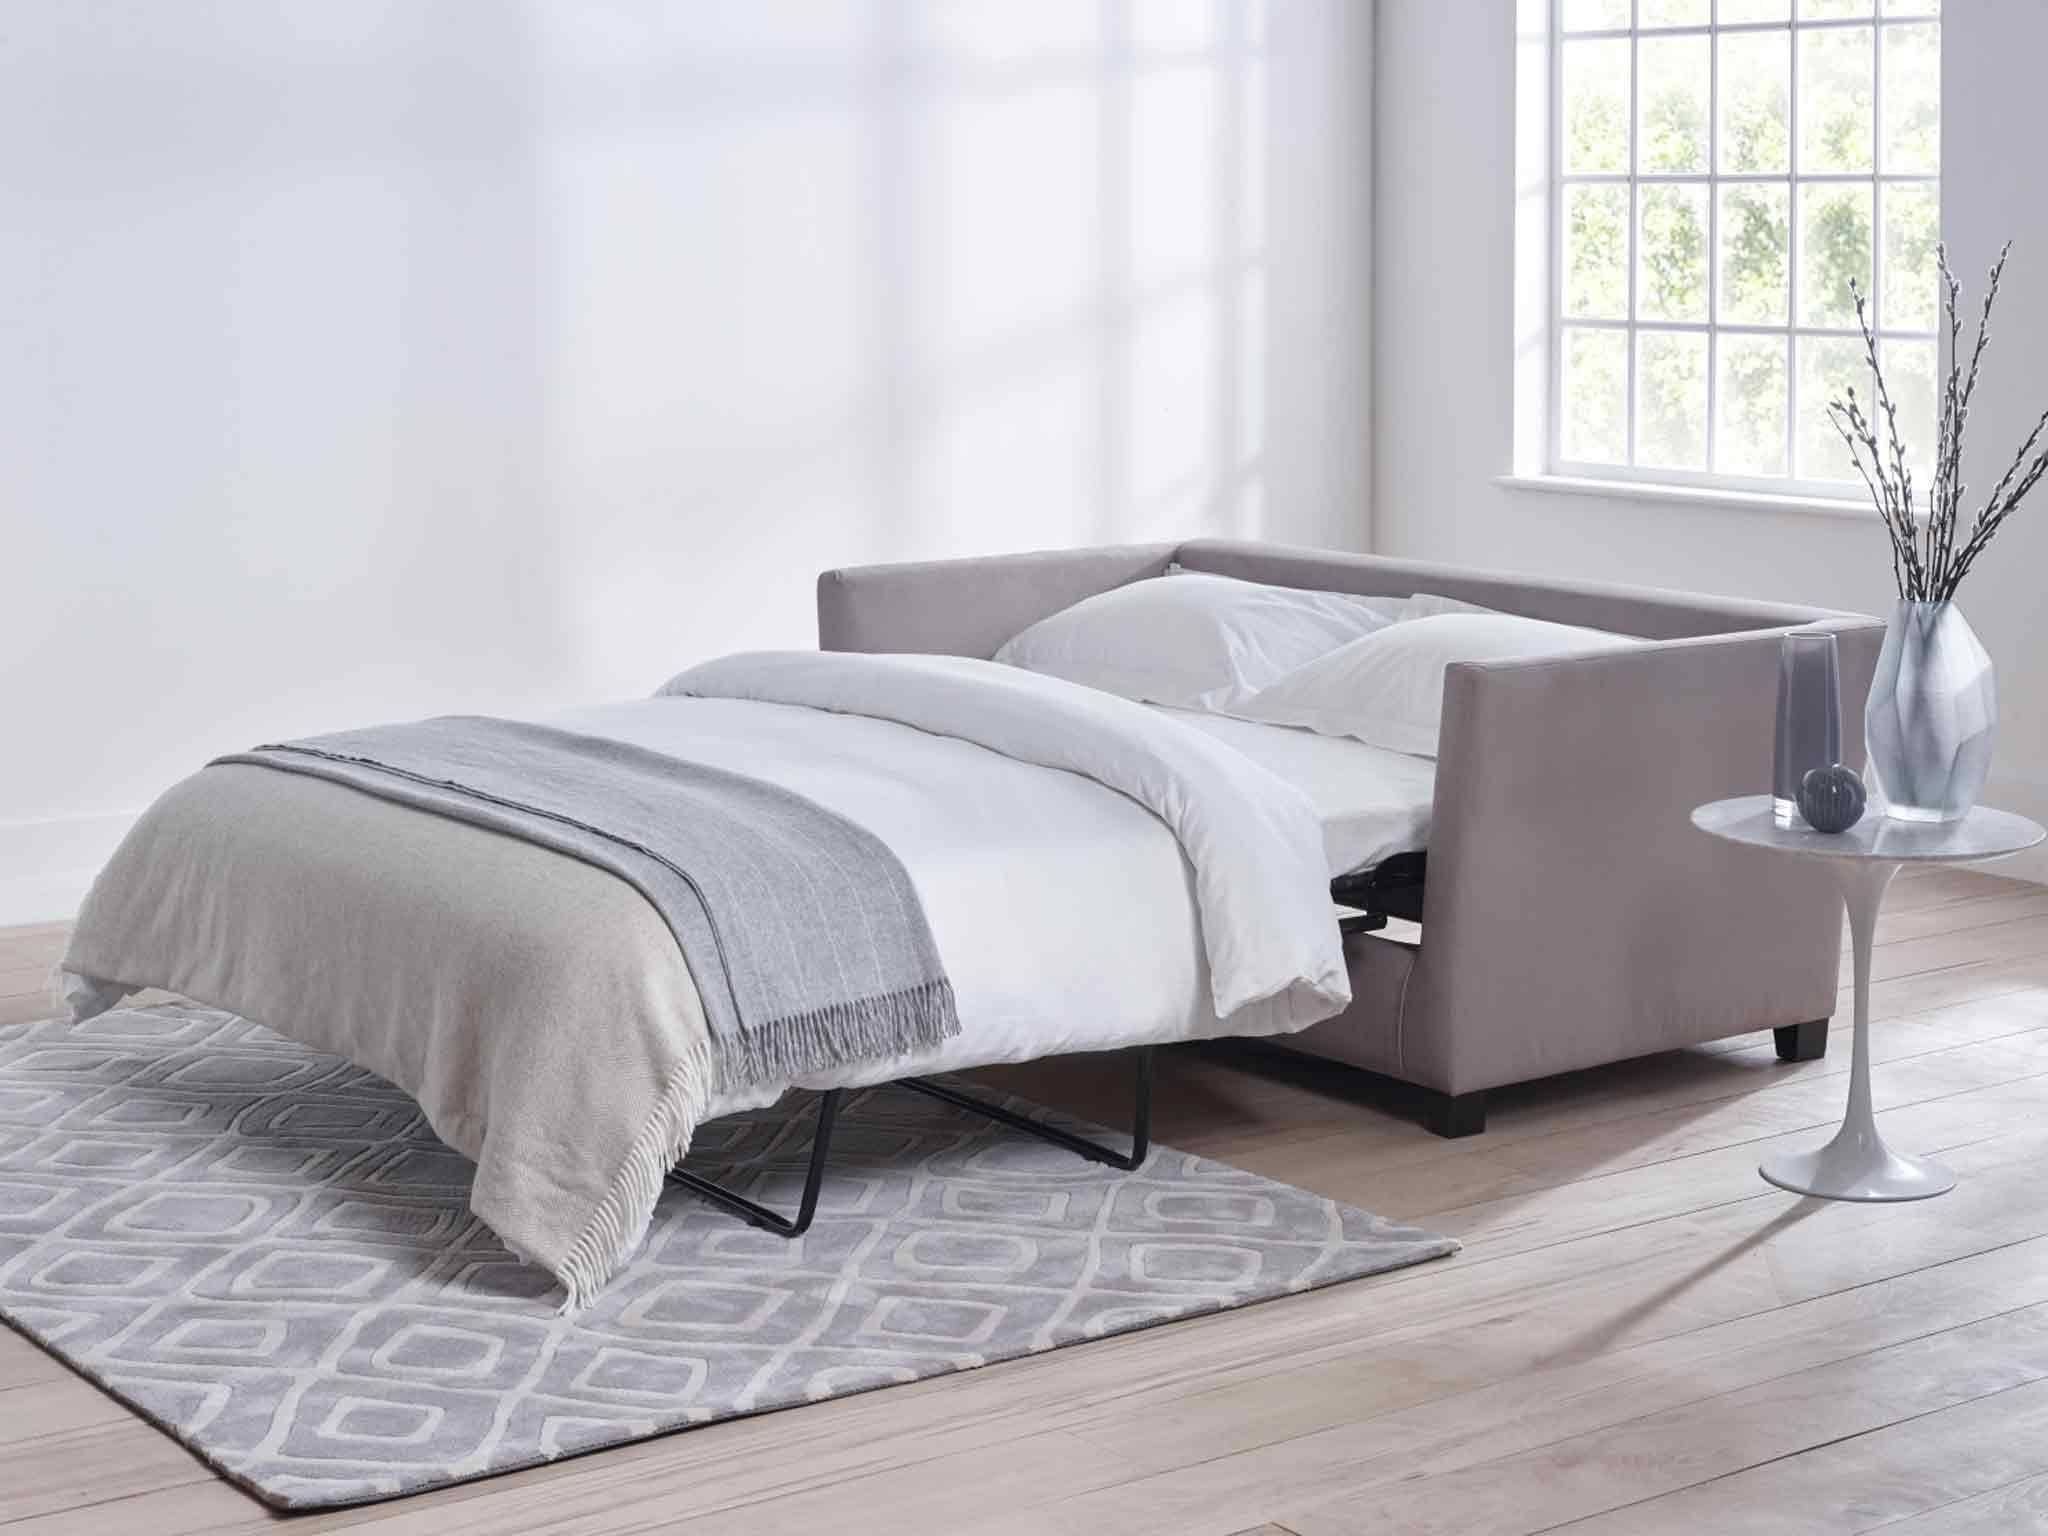 10 Best Sofa Beds | The Independent In Sheets For Sofa Beds Mattress (View 6 of 15)